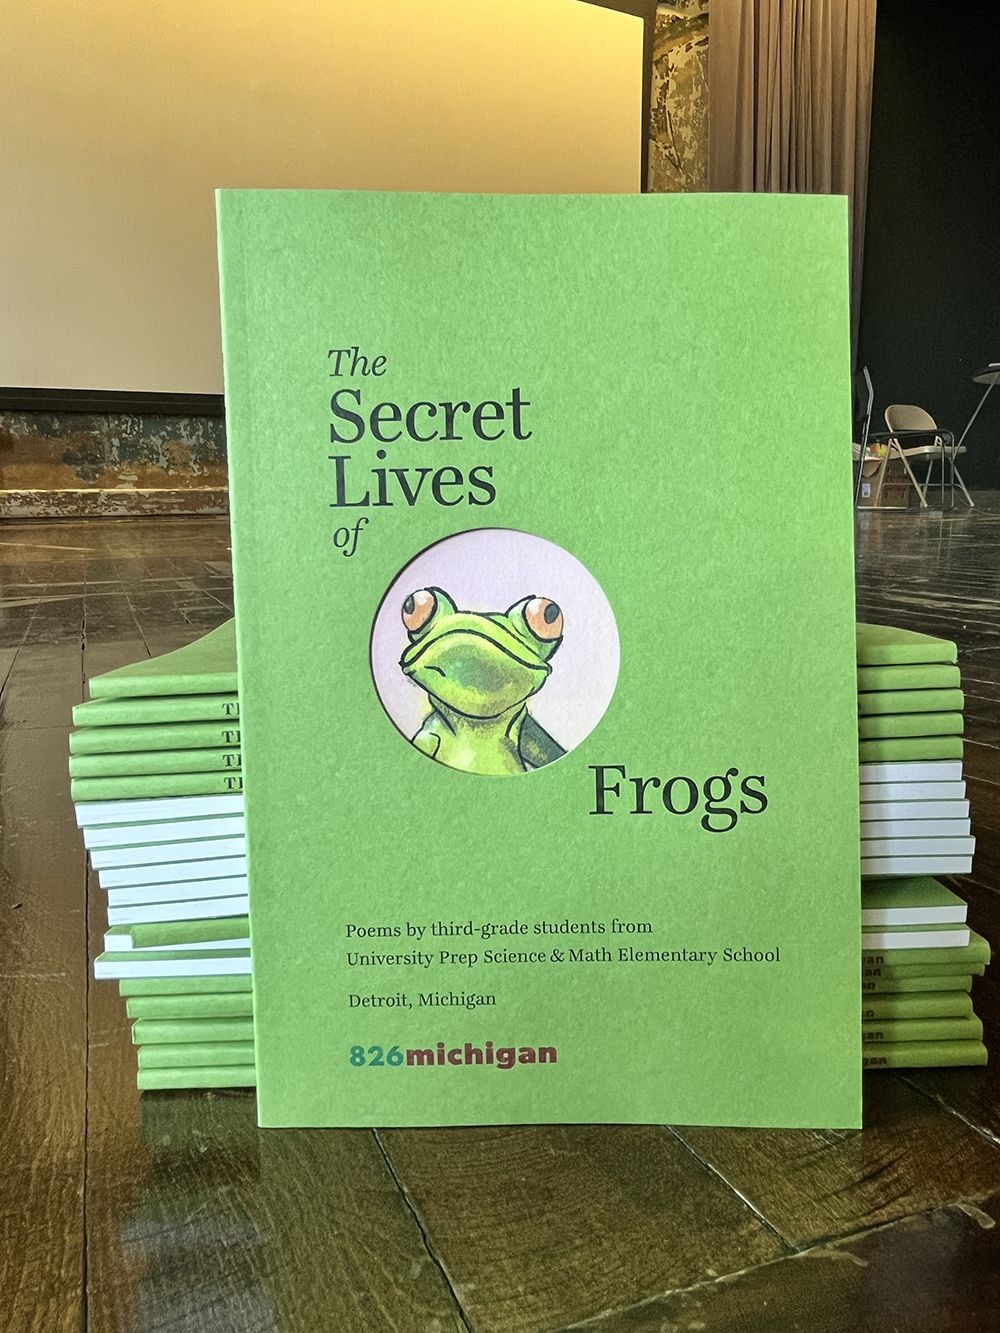 The Secret Lives of Frogs